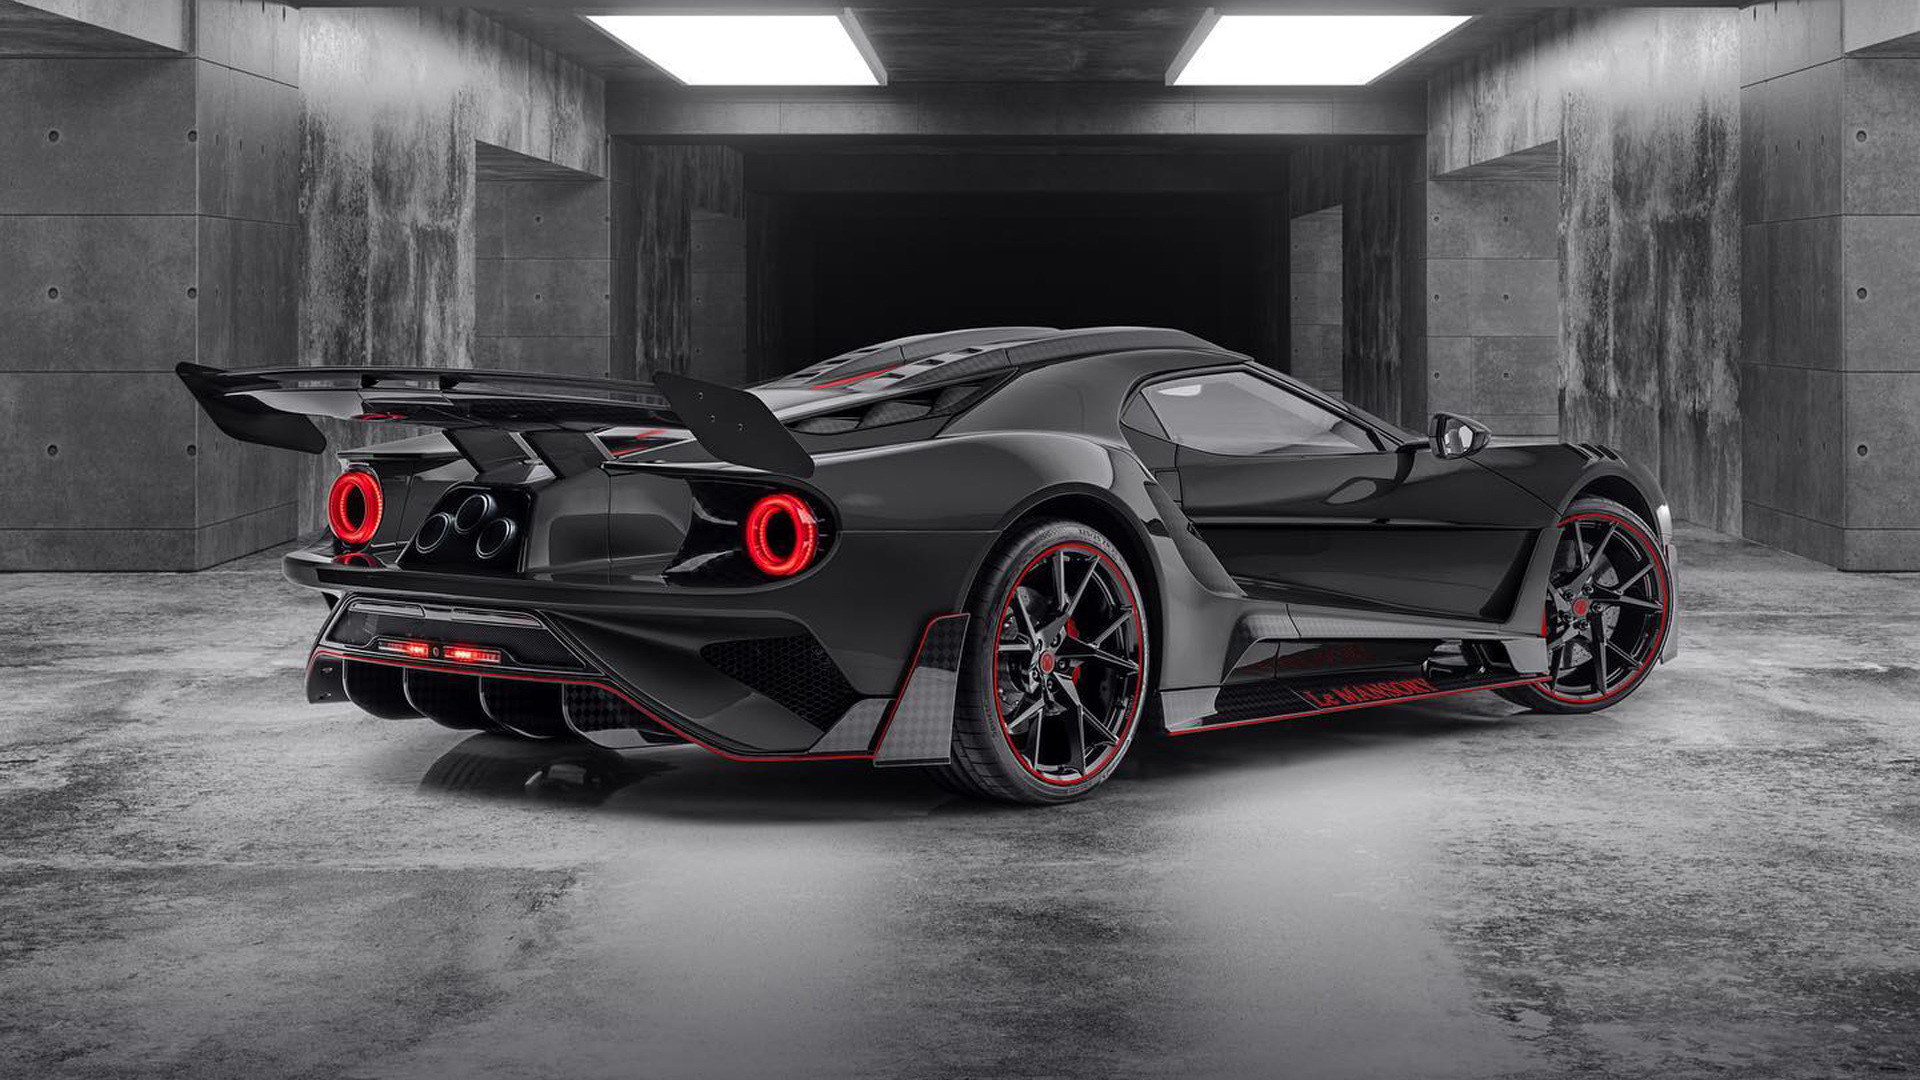 Mansory LeMansory based on the Ford GT